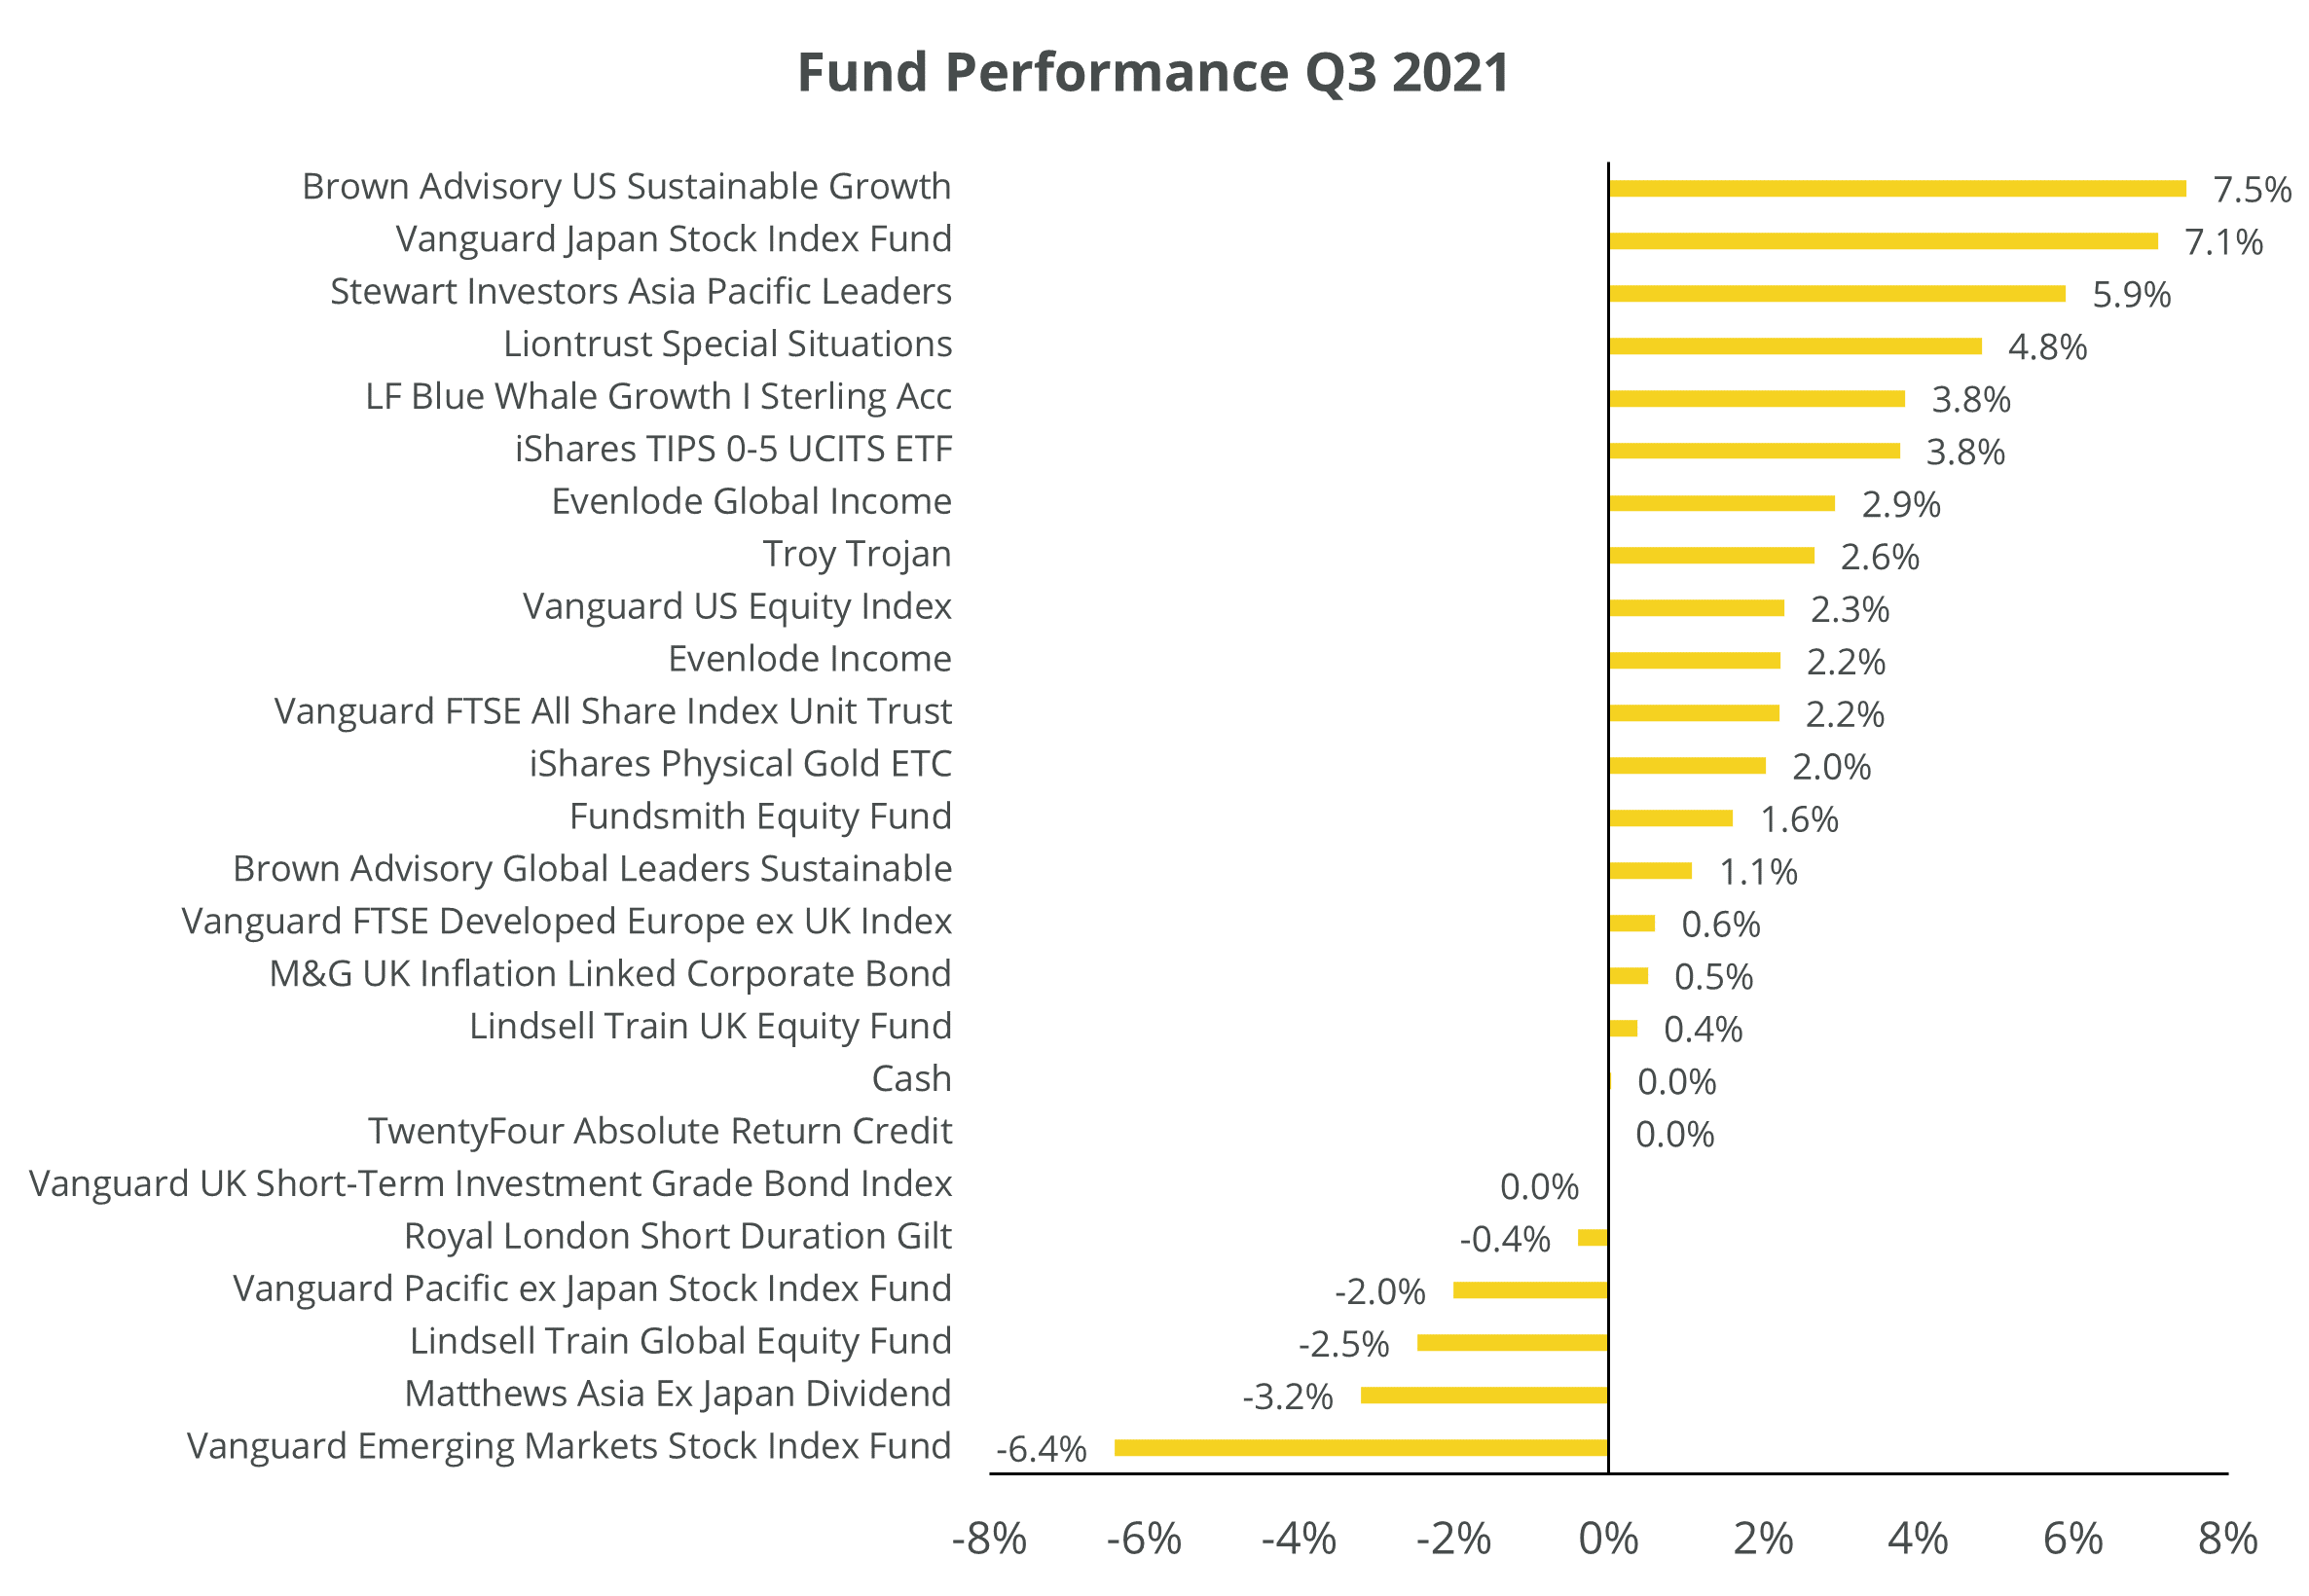 Chart of fund performance year to date as of September 2021